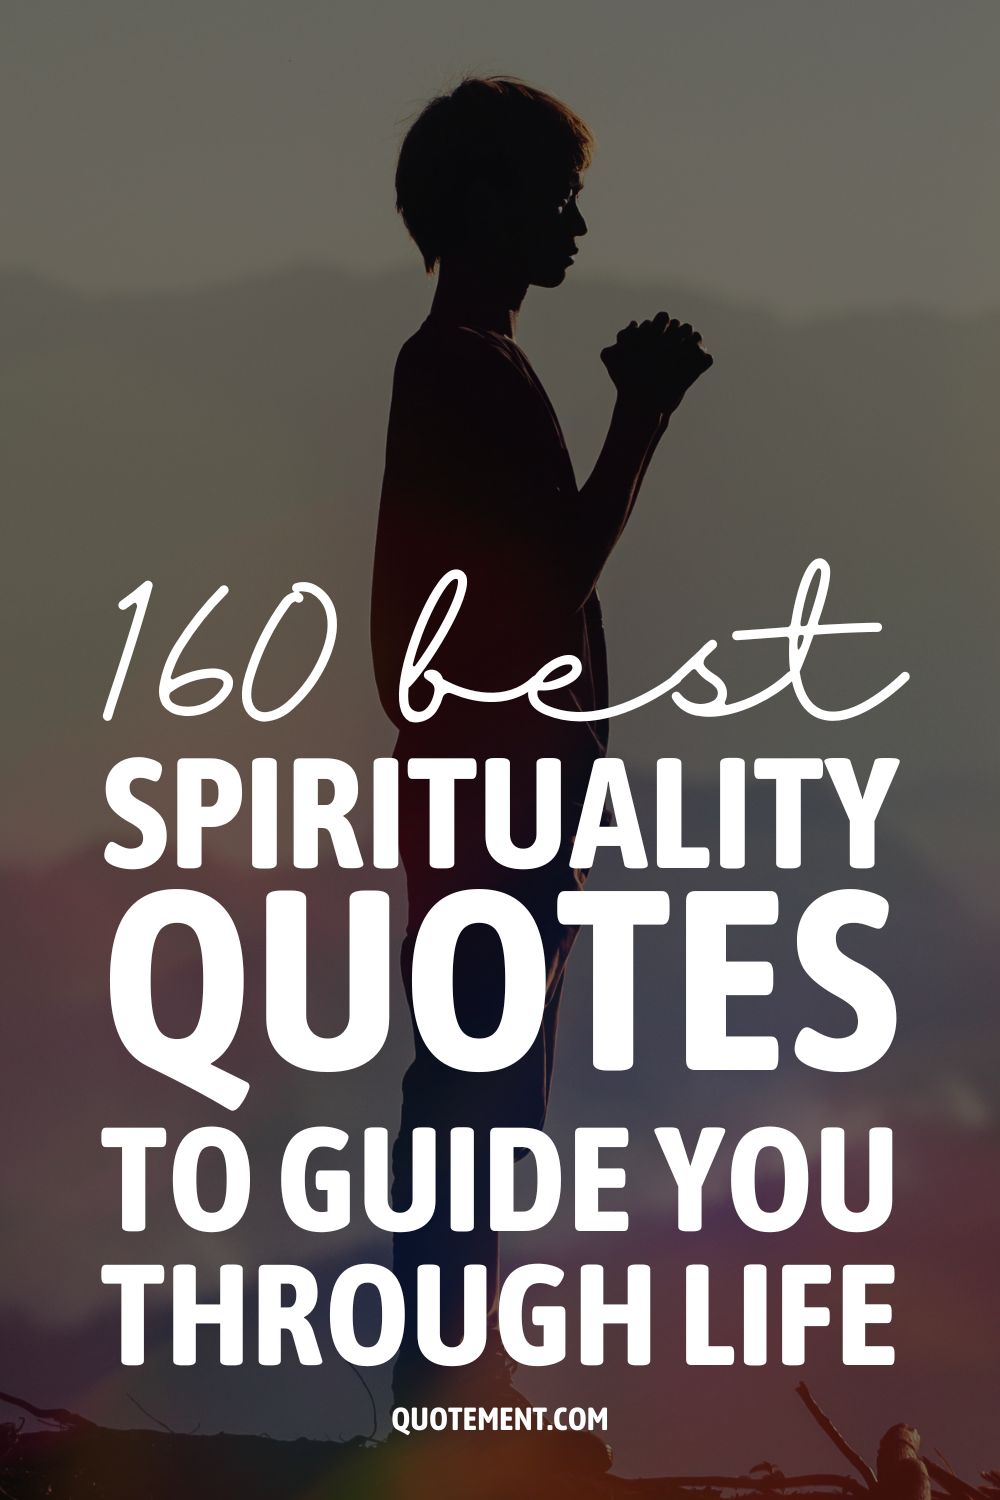 160 Best Spirituality Quotes To Guide You Through Life